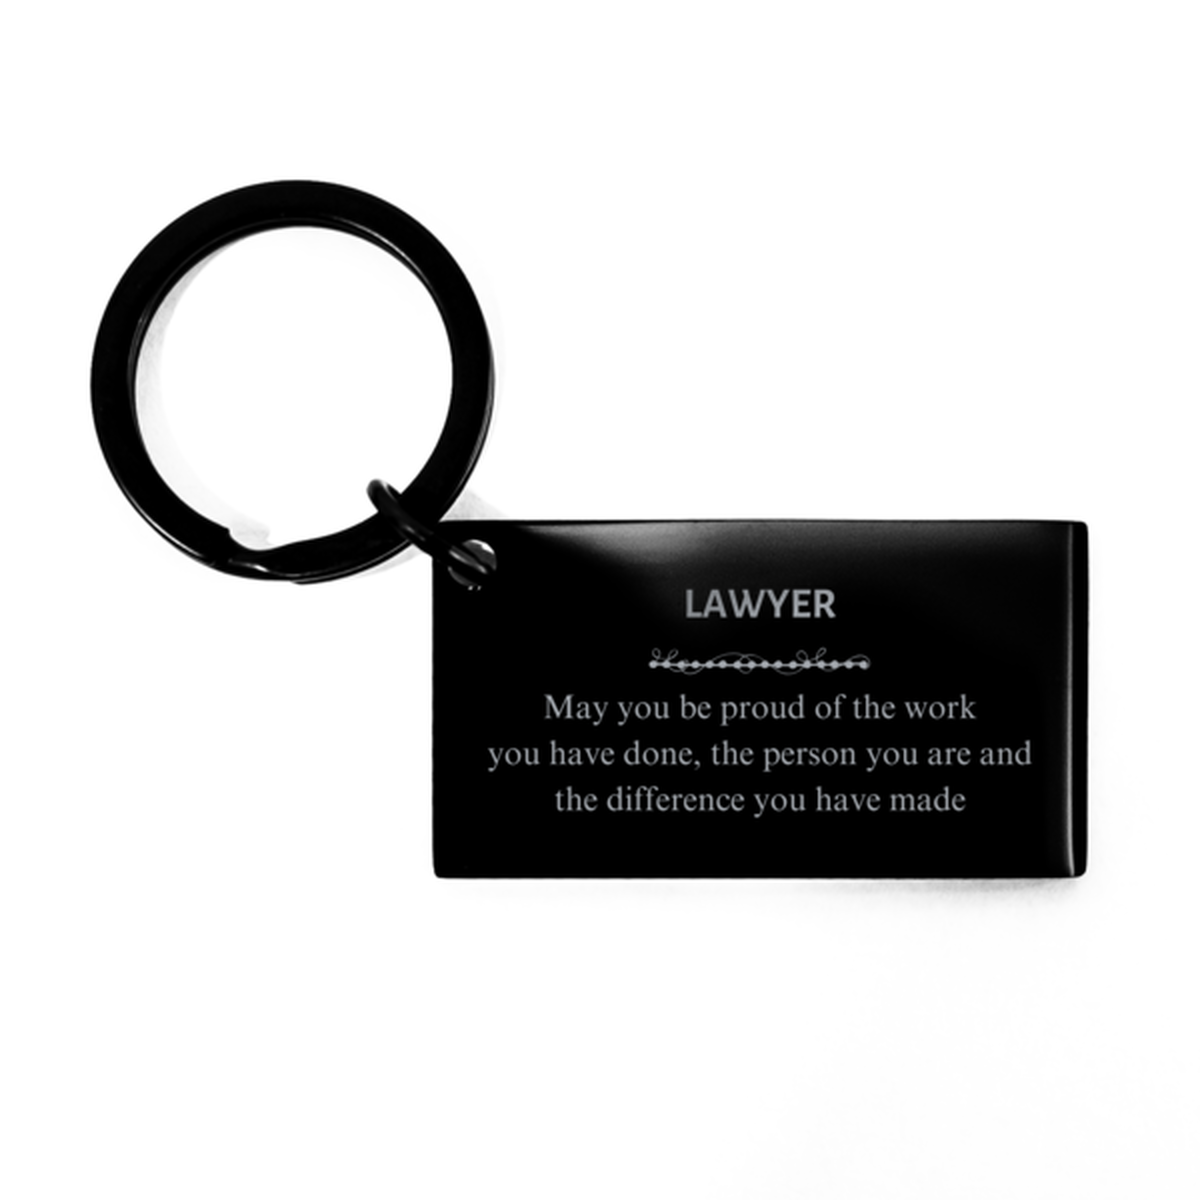 Network Administrator May you be proud of the work you have done, Retirement Lawyer Keychain for Colleague Appreciation Gifts Amazing for Lawyer